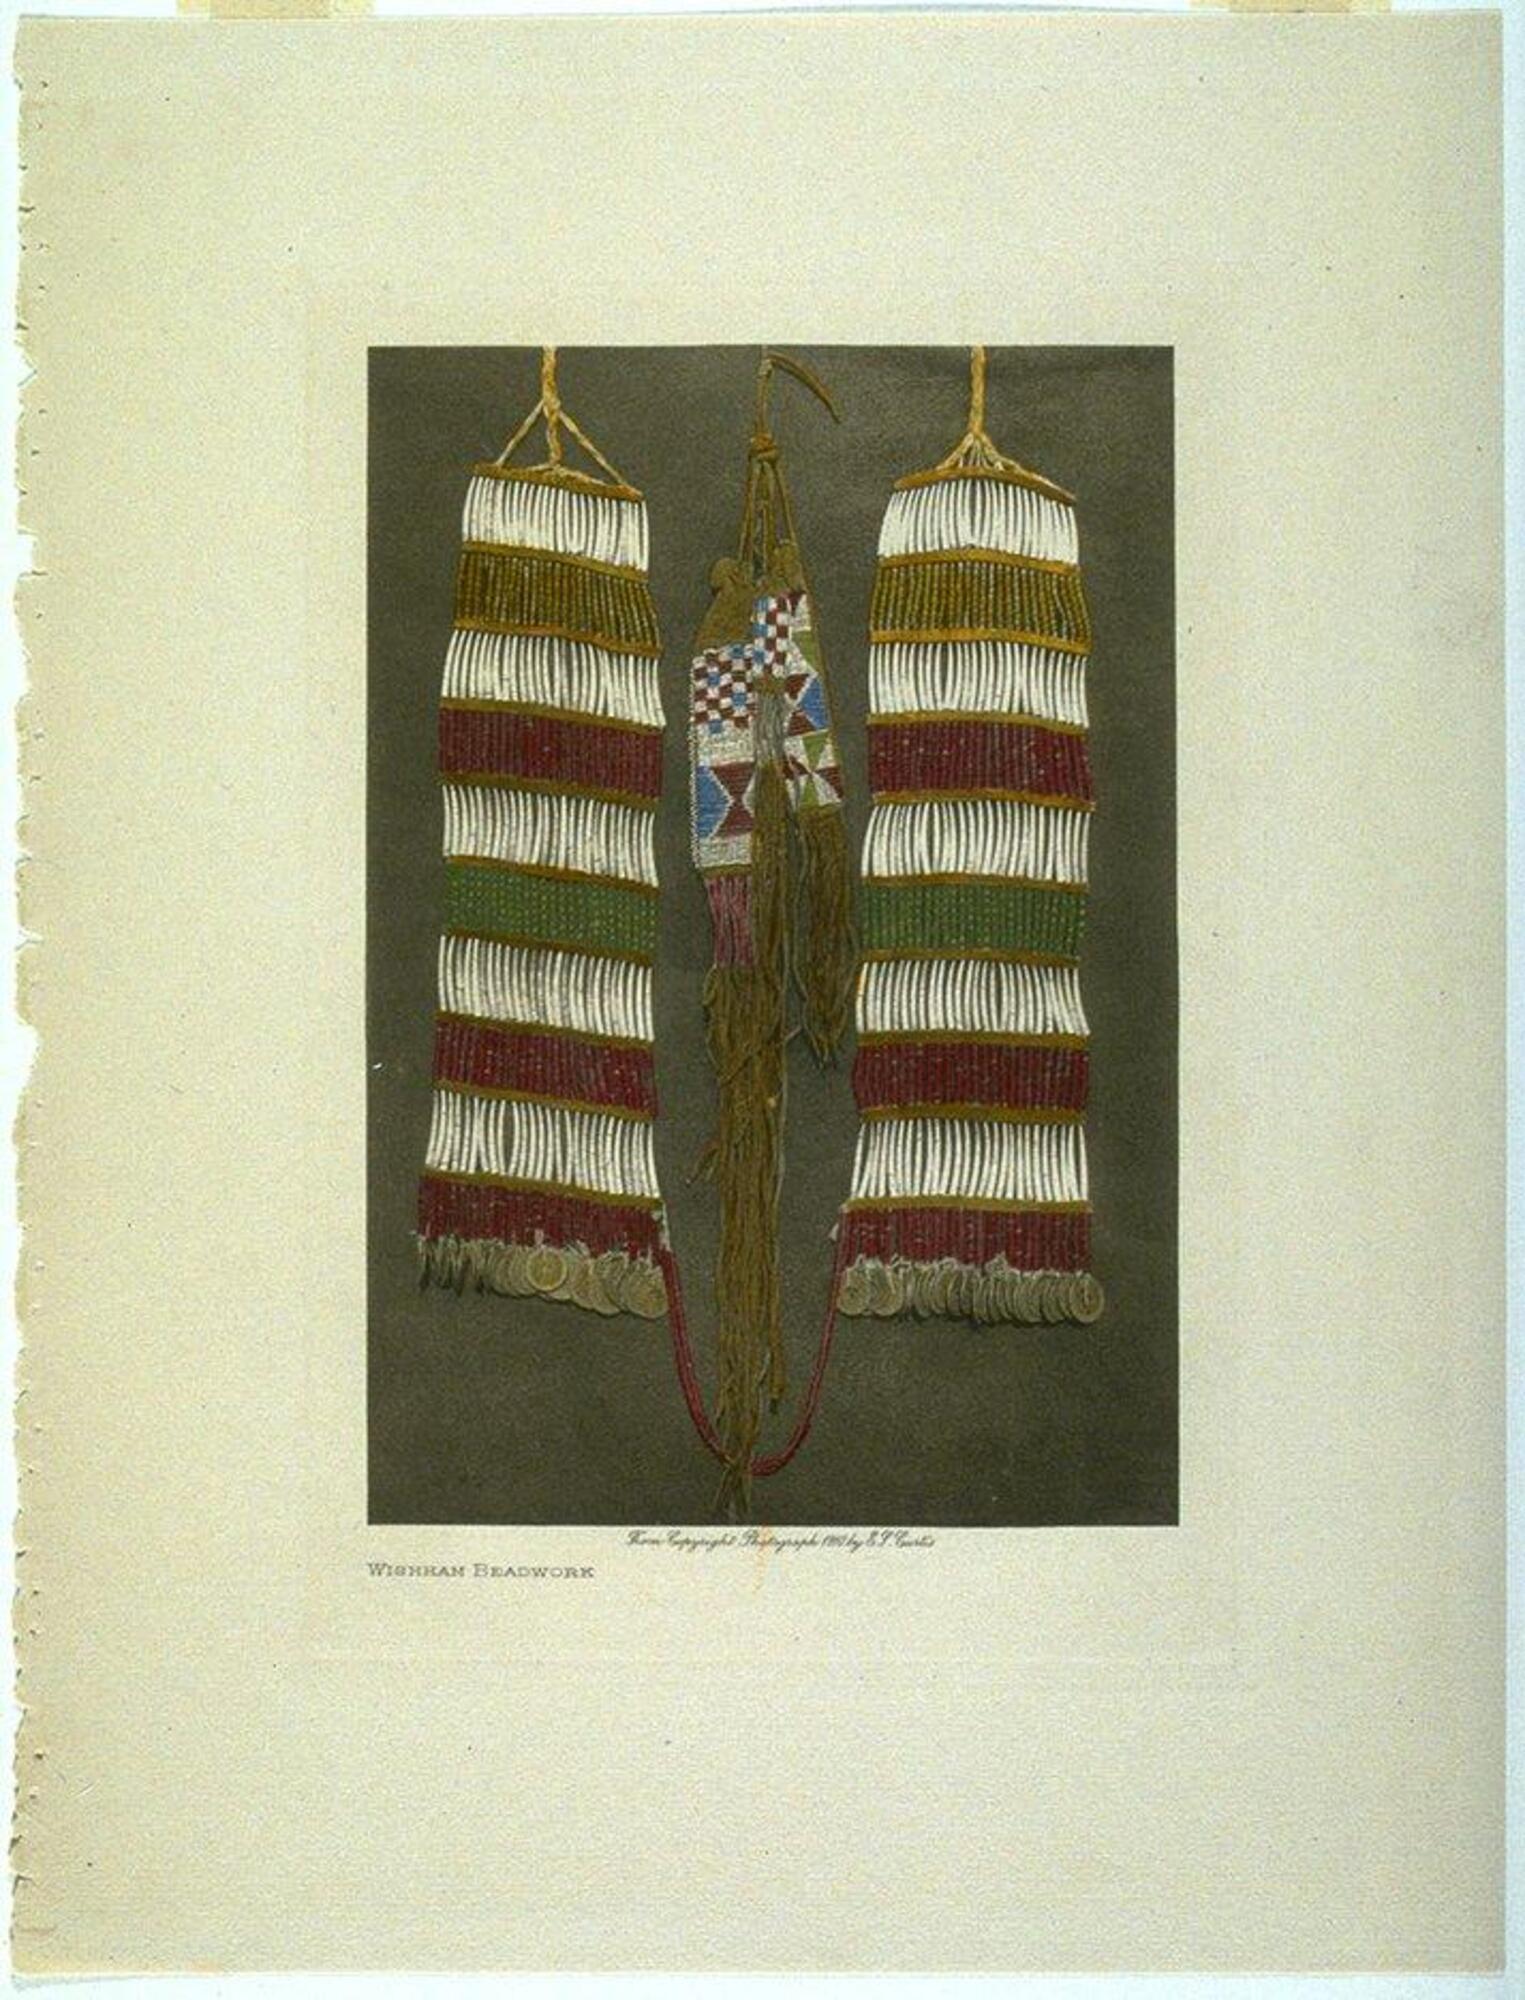 A hand-tinted photograph of woven beadwork. Two larger, identical rectangular pieces frame a smaller piece with multiple tassles in the center. 